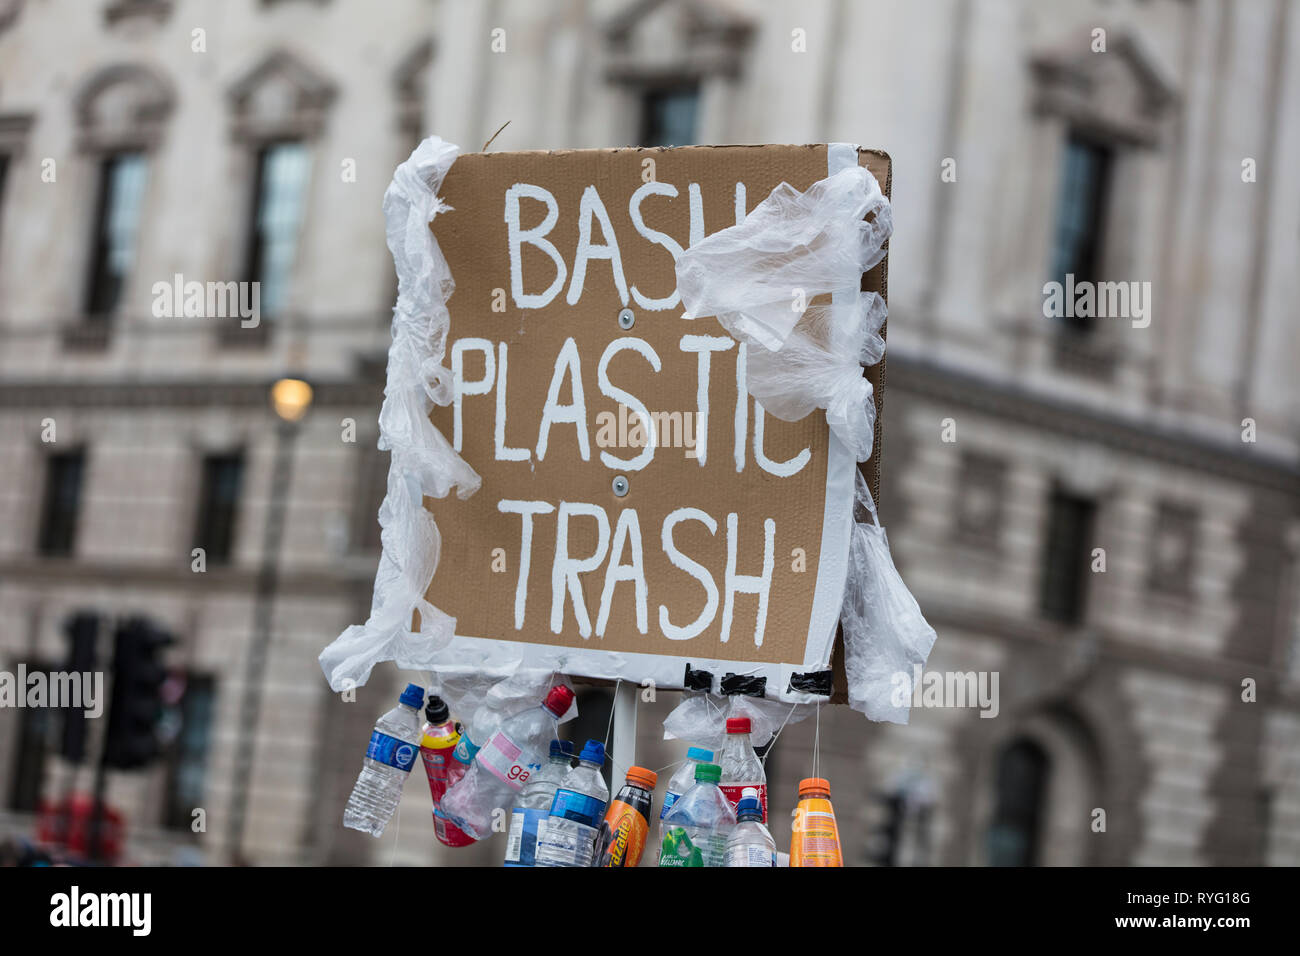 LONDON, UK - March 13 2019: Protestor holds ban plastic trash banner at protest Stock Photo